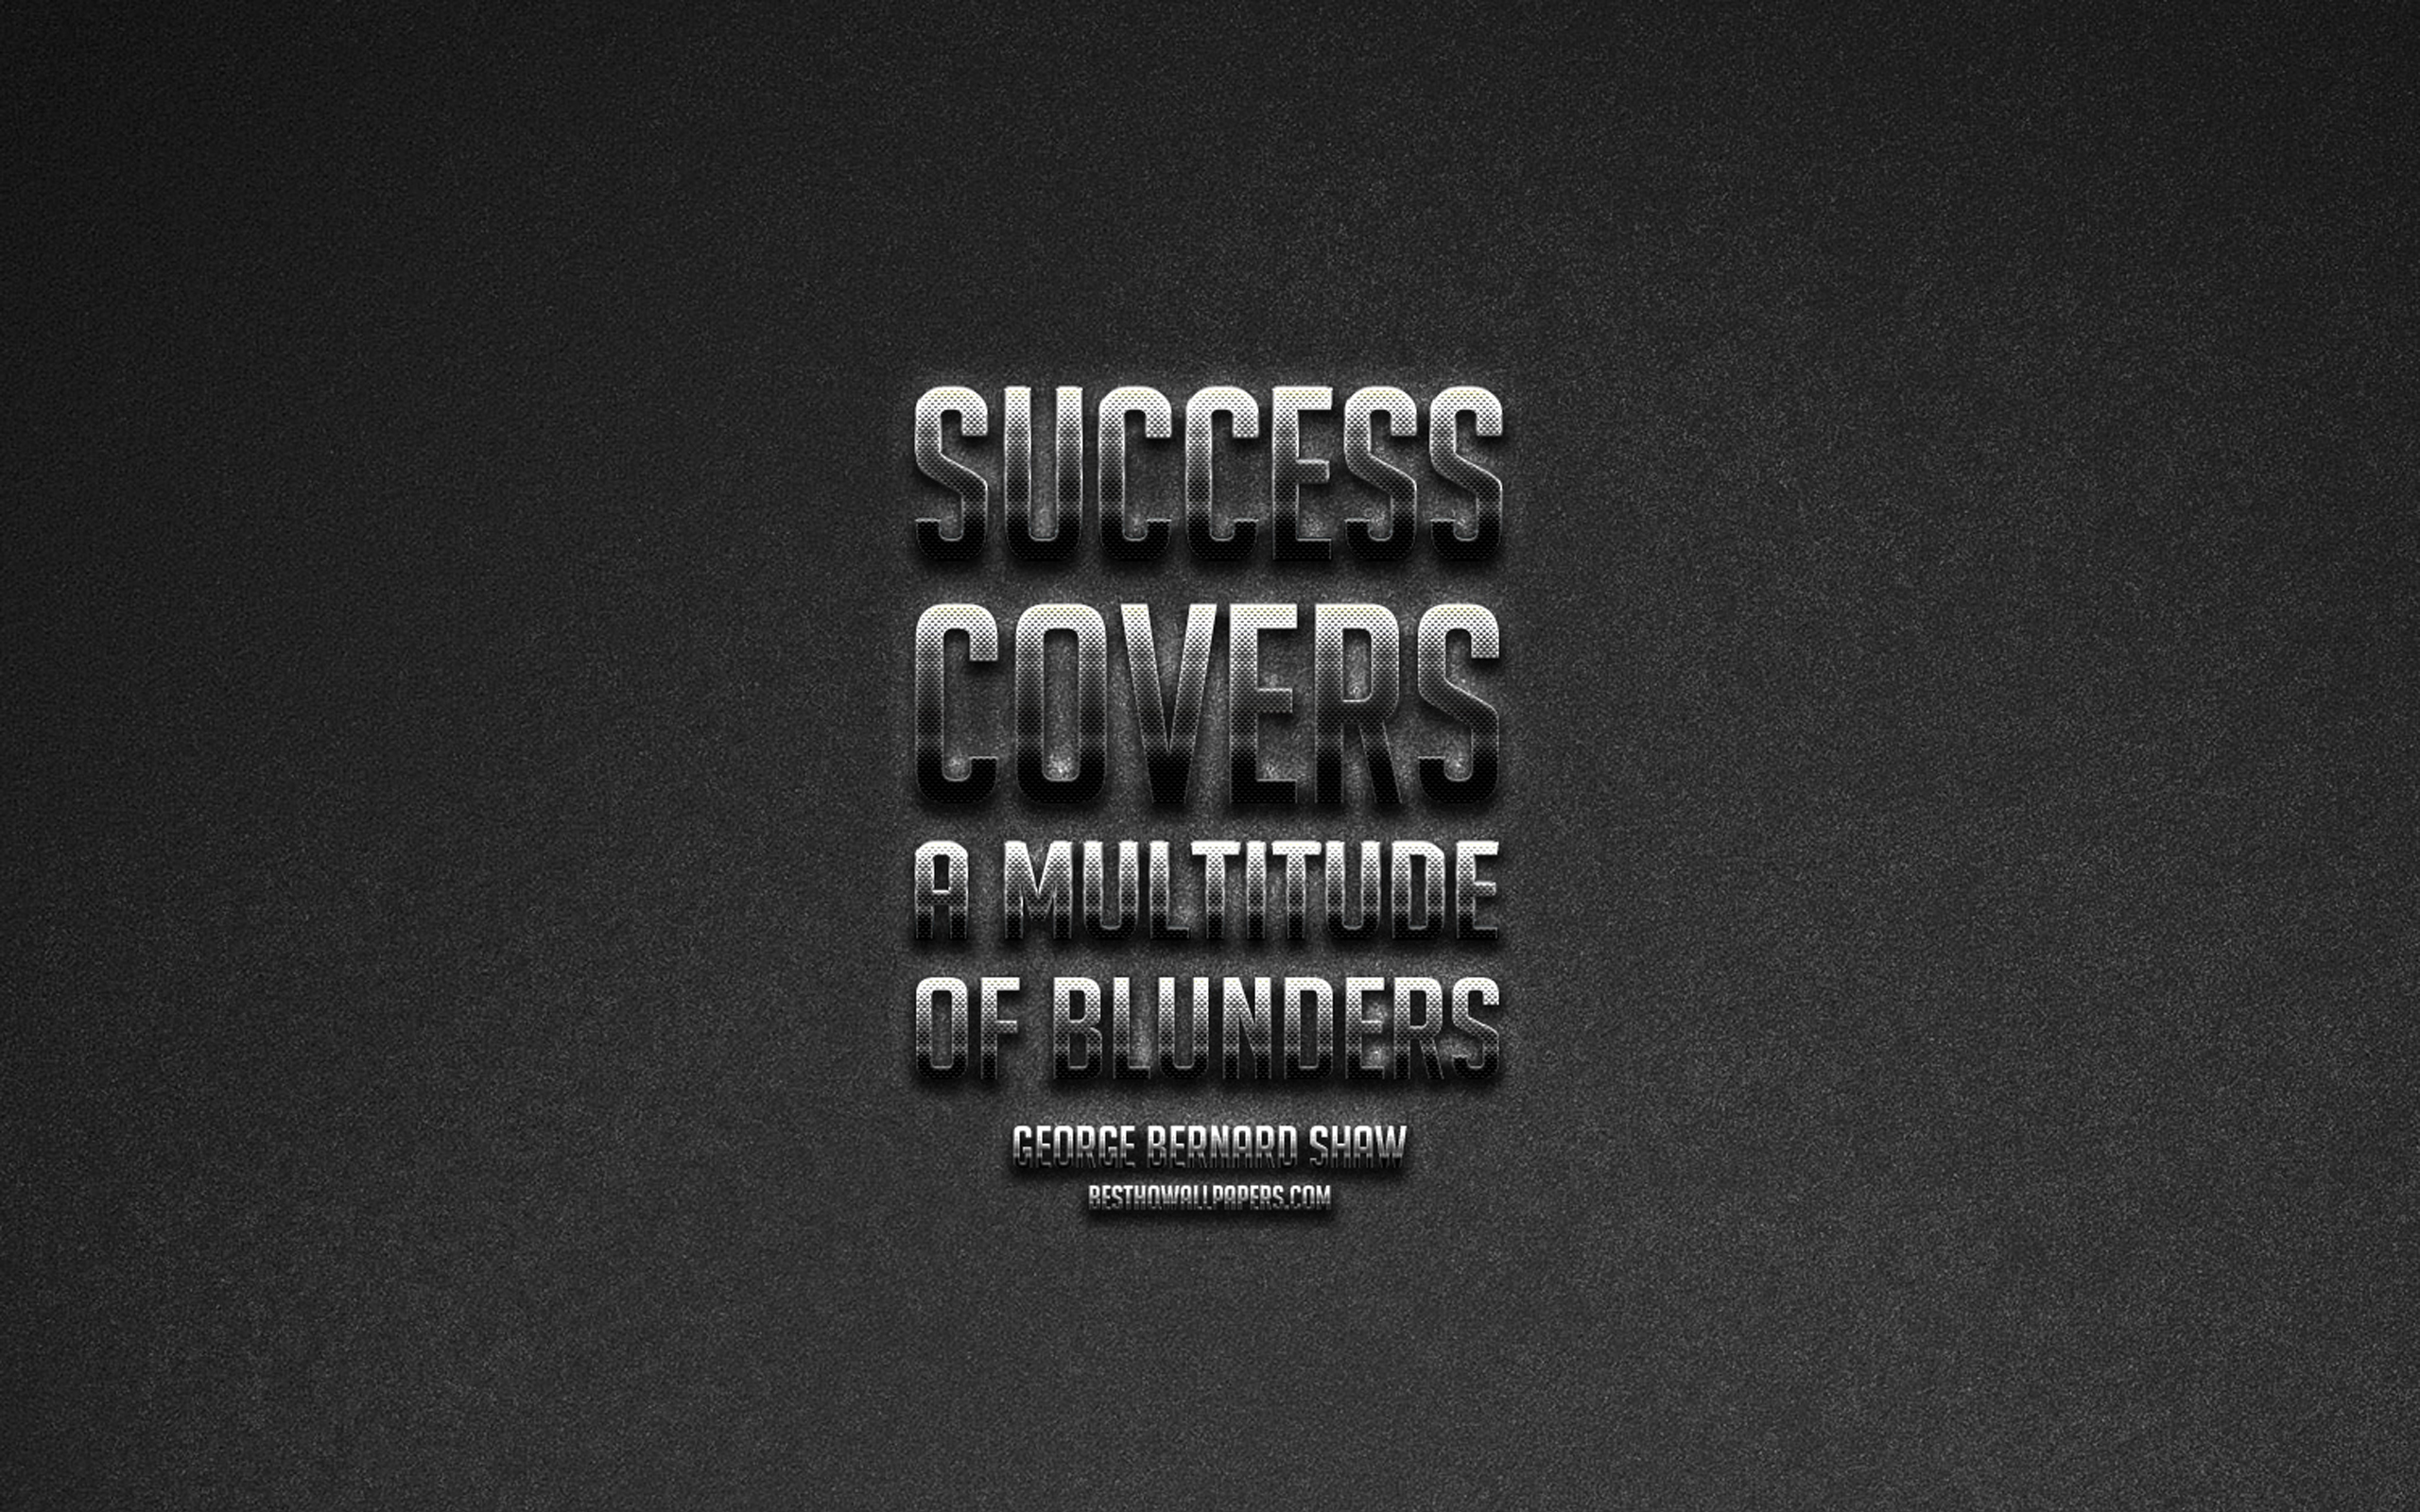 Download wallpaper Success covers a multitude of blunders, George Bernard Shaw quotes, creative art, success quotes, popular quotes for desktop with resolution 2560x1600. High Quality HD picture wallpaper